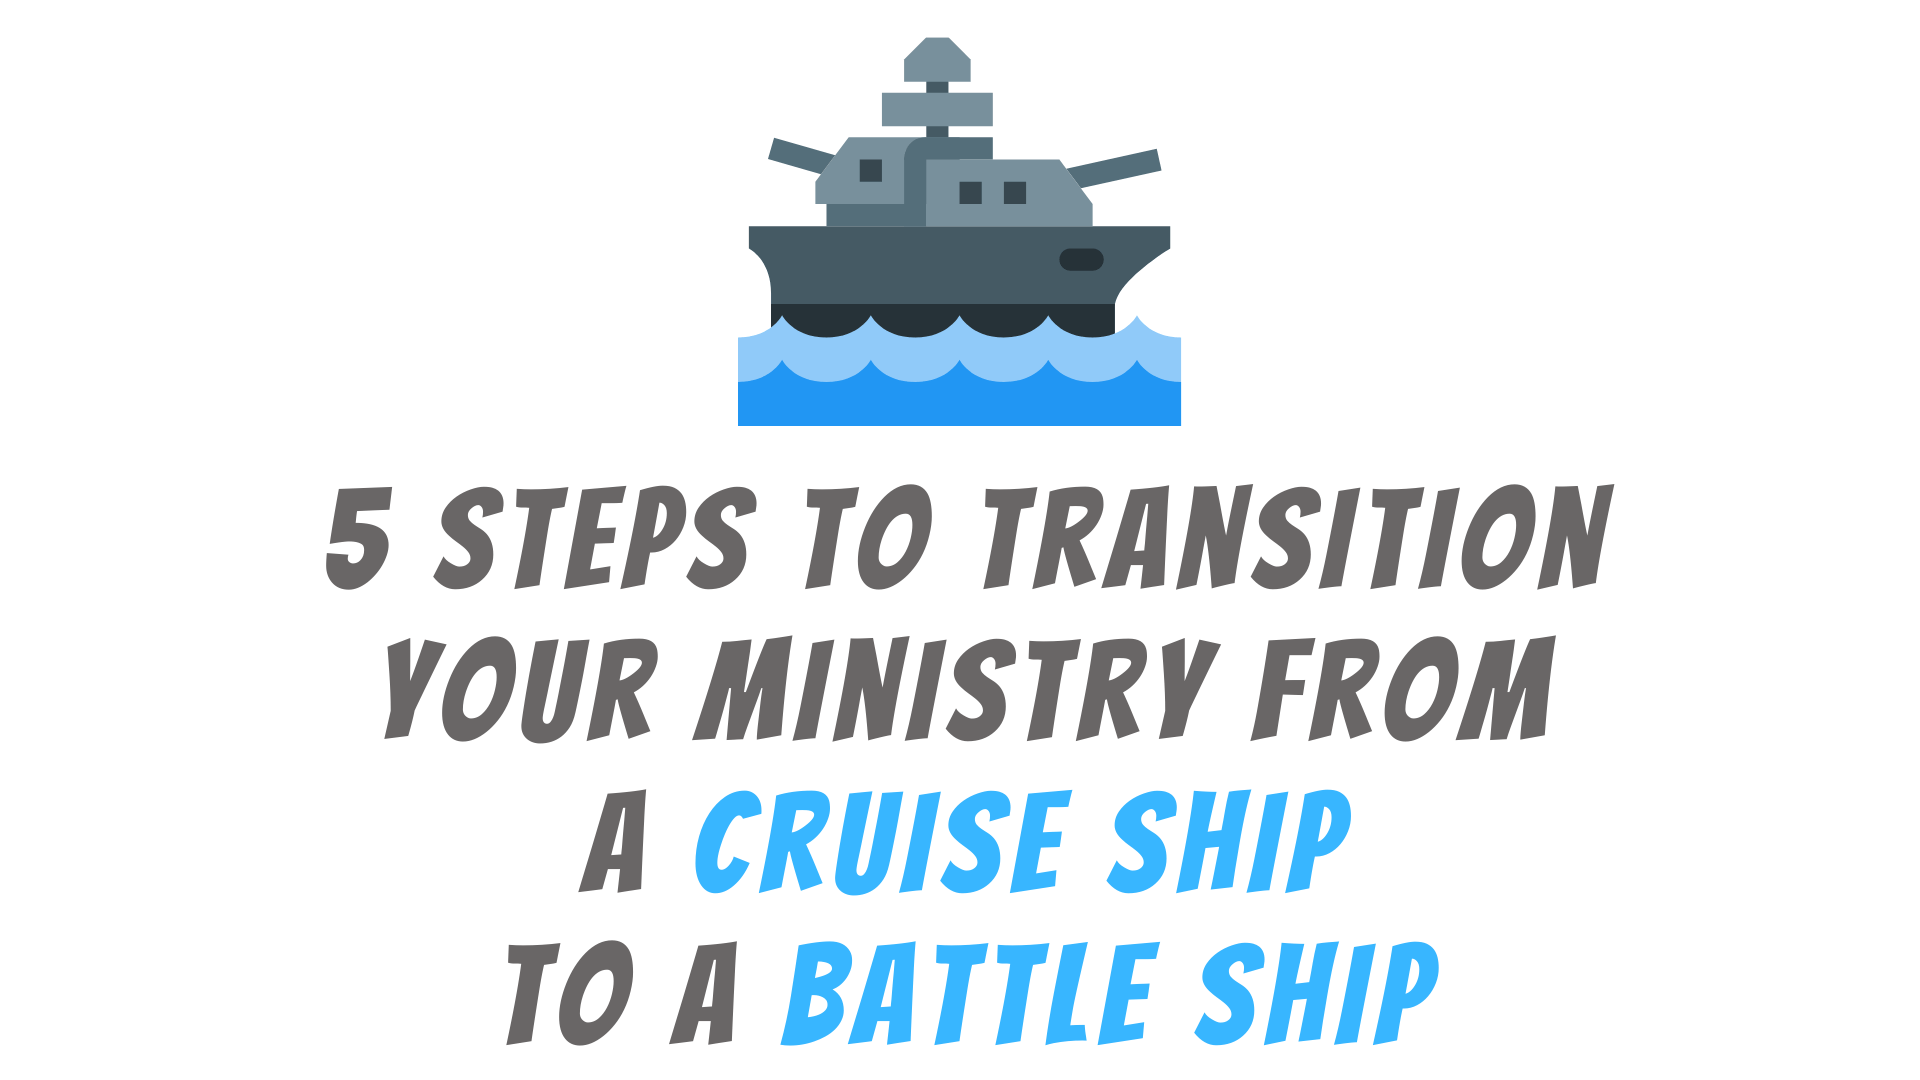 5 Steps to Transition Your Church or Ministry from a Cruise Ship to a Battle Ship